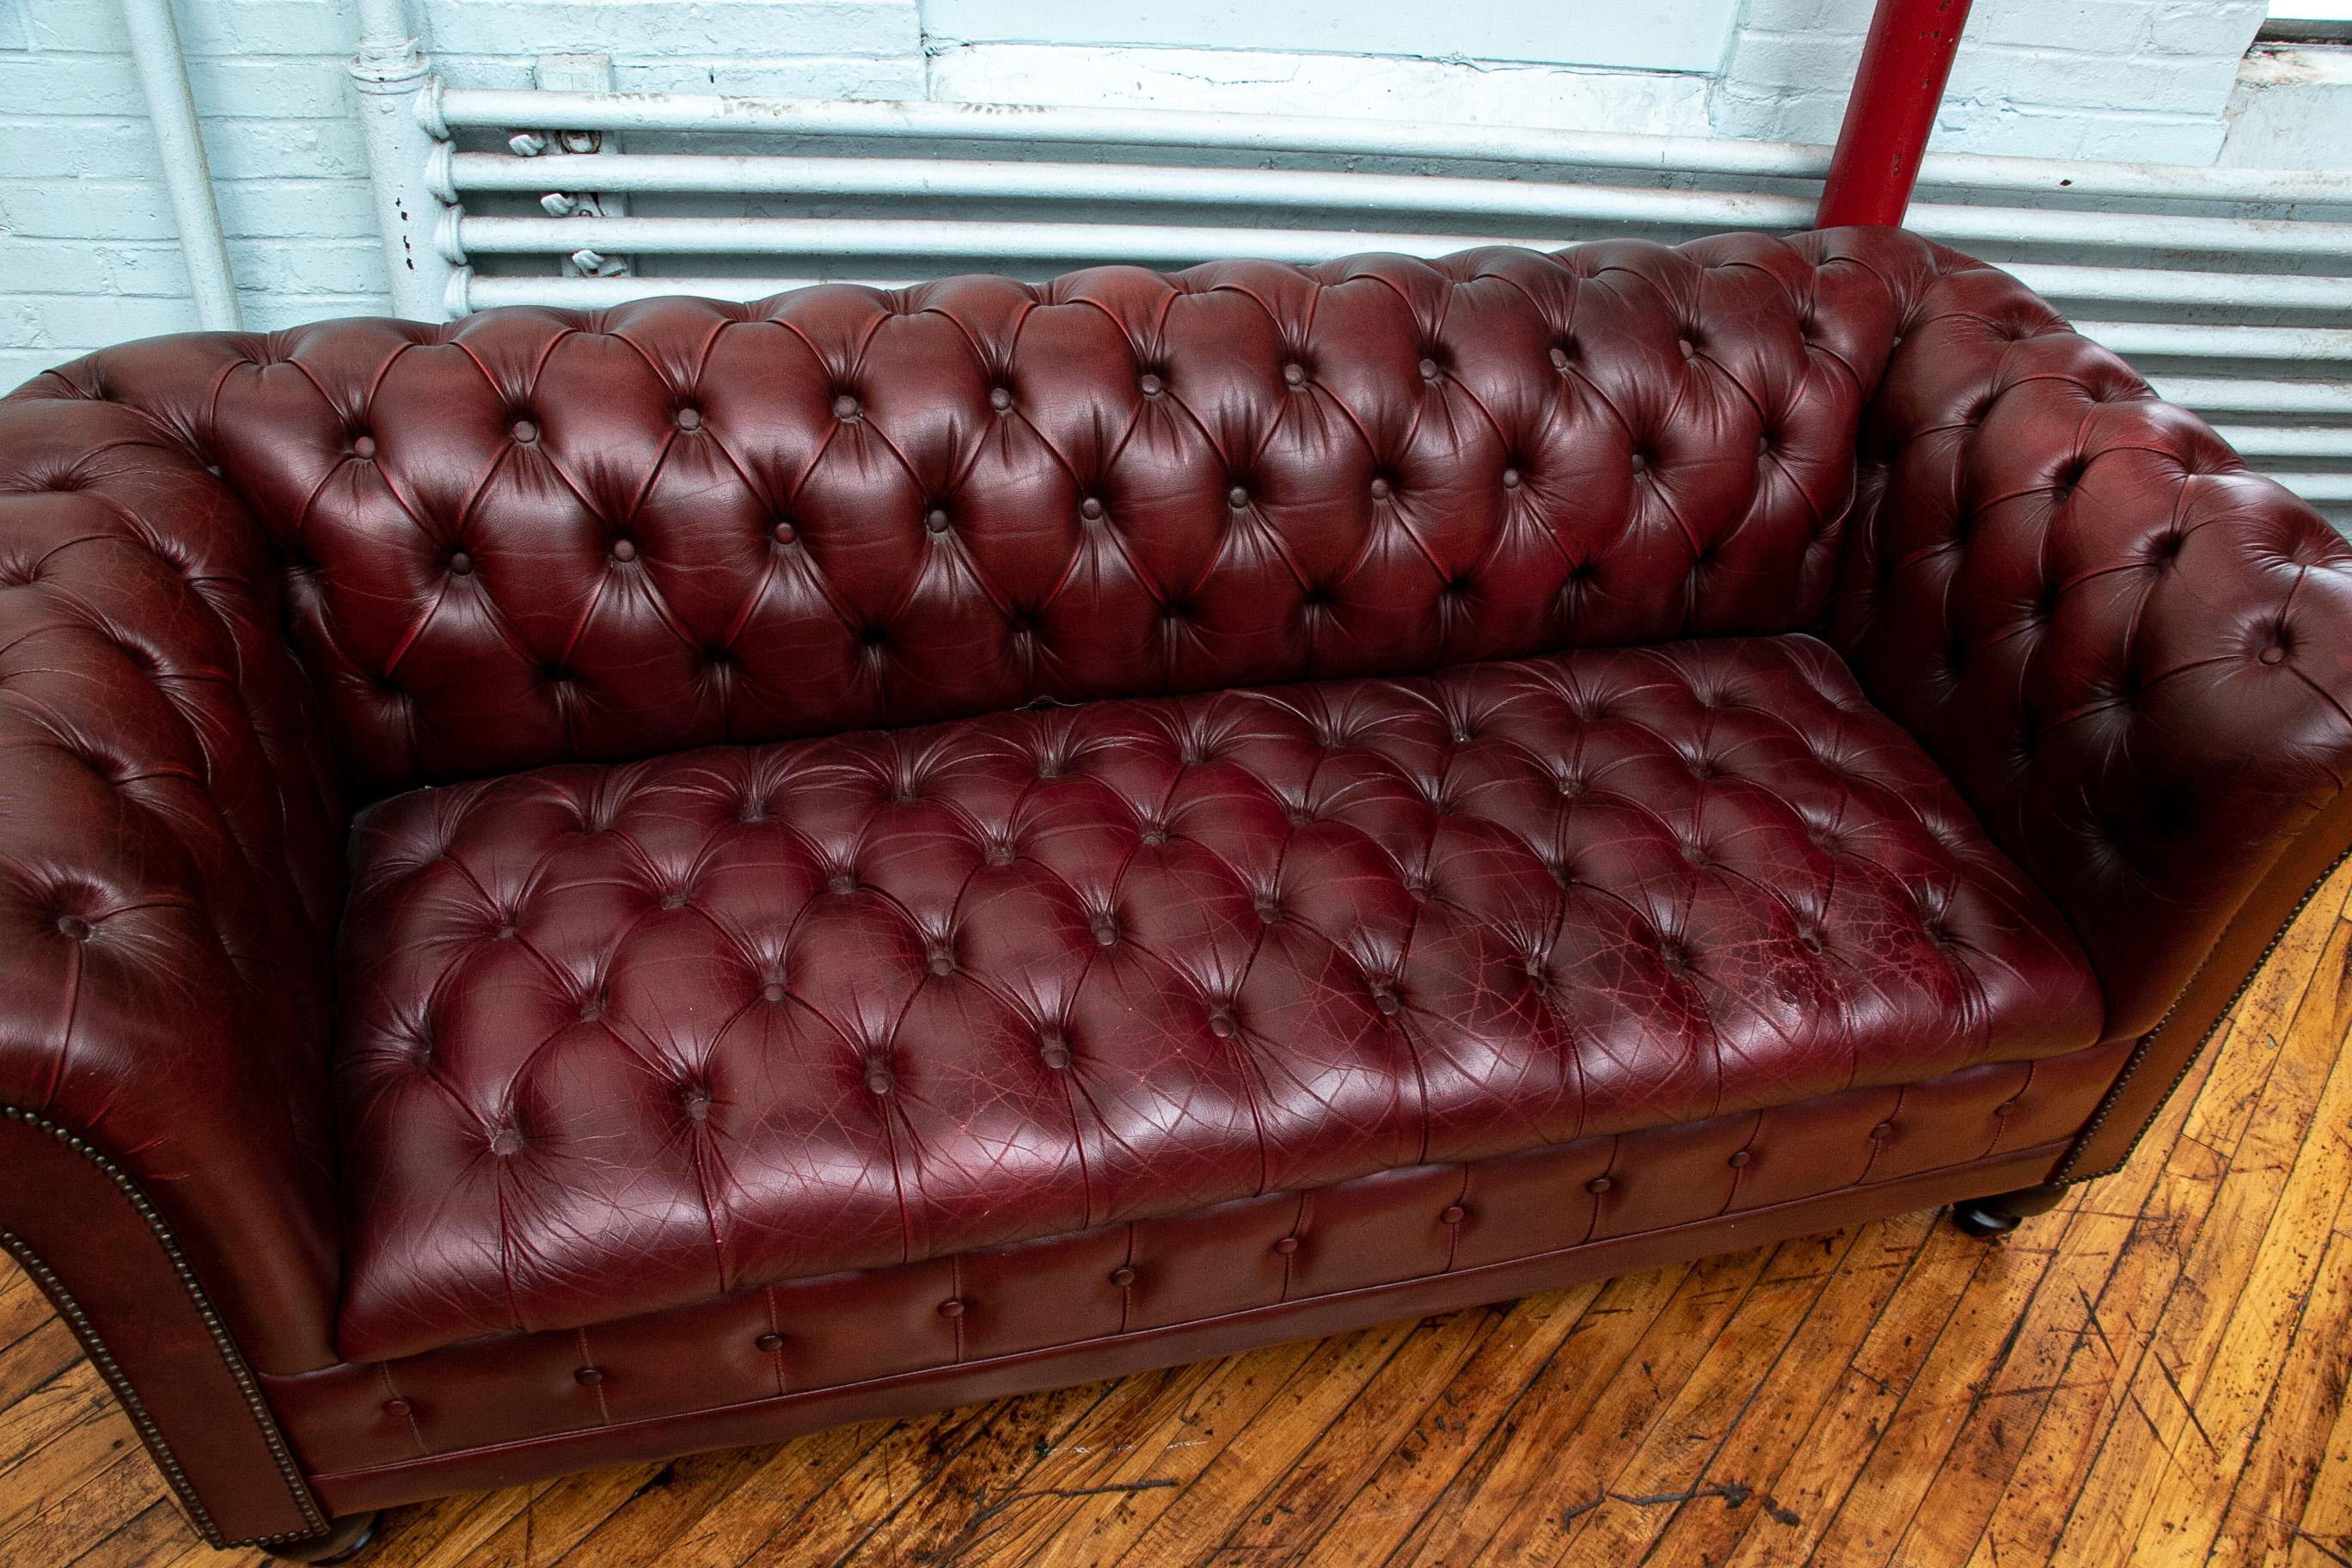 With nailhead trim and raised on turned feet. In a nicely worn patina with expected wear but good condition.